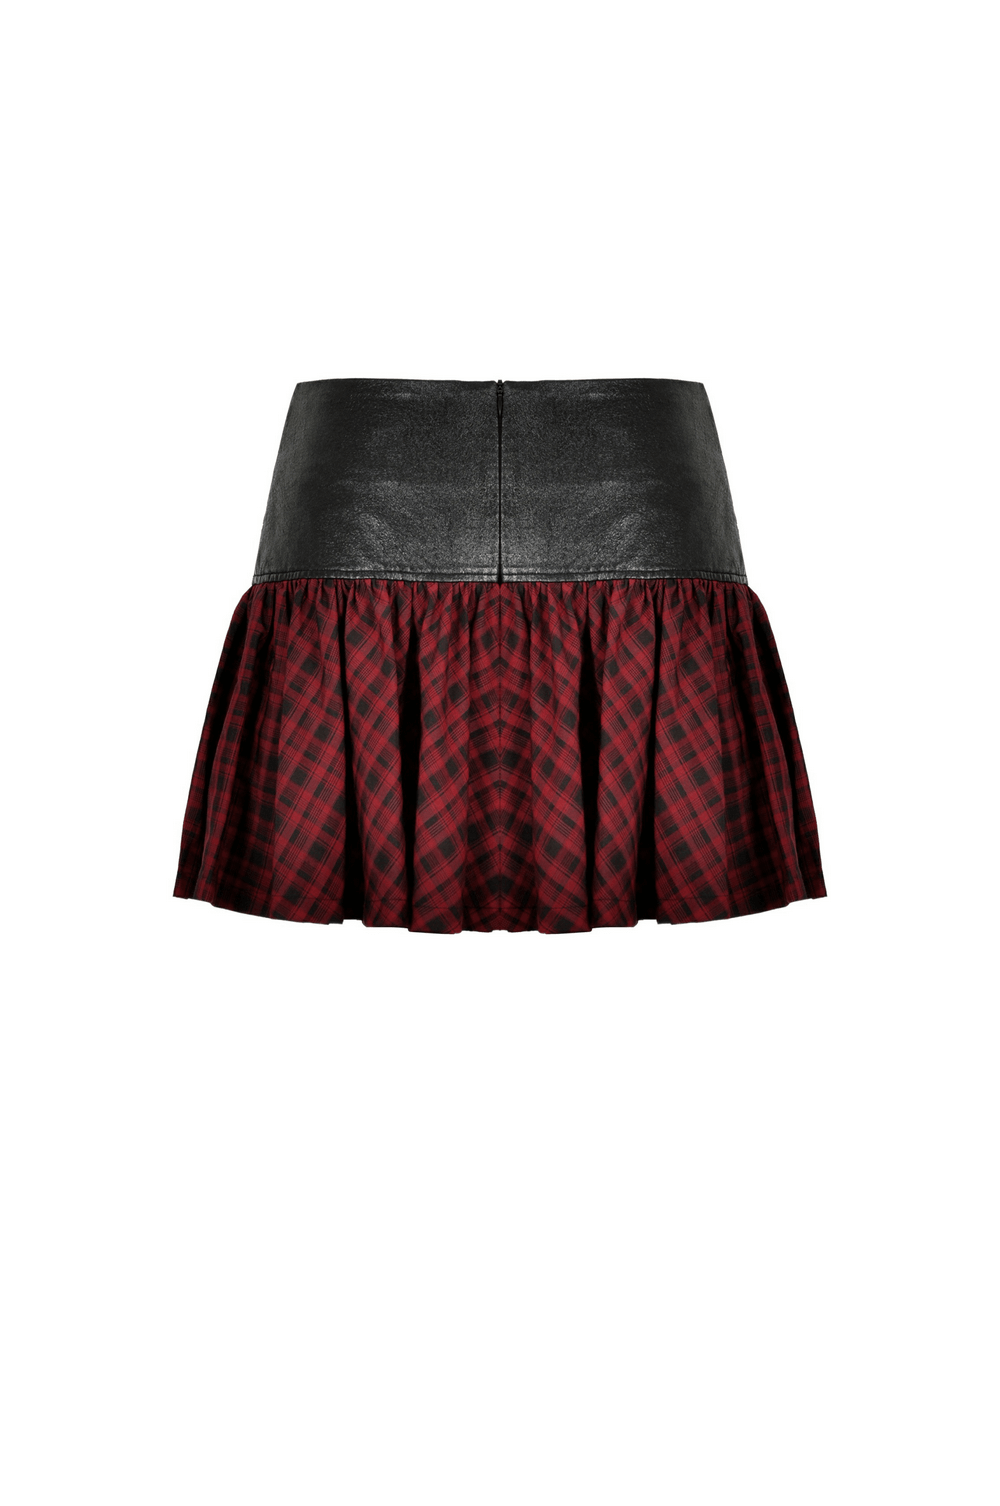 Red and Black Tartan Gothic Mini Skirt with Belt